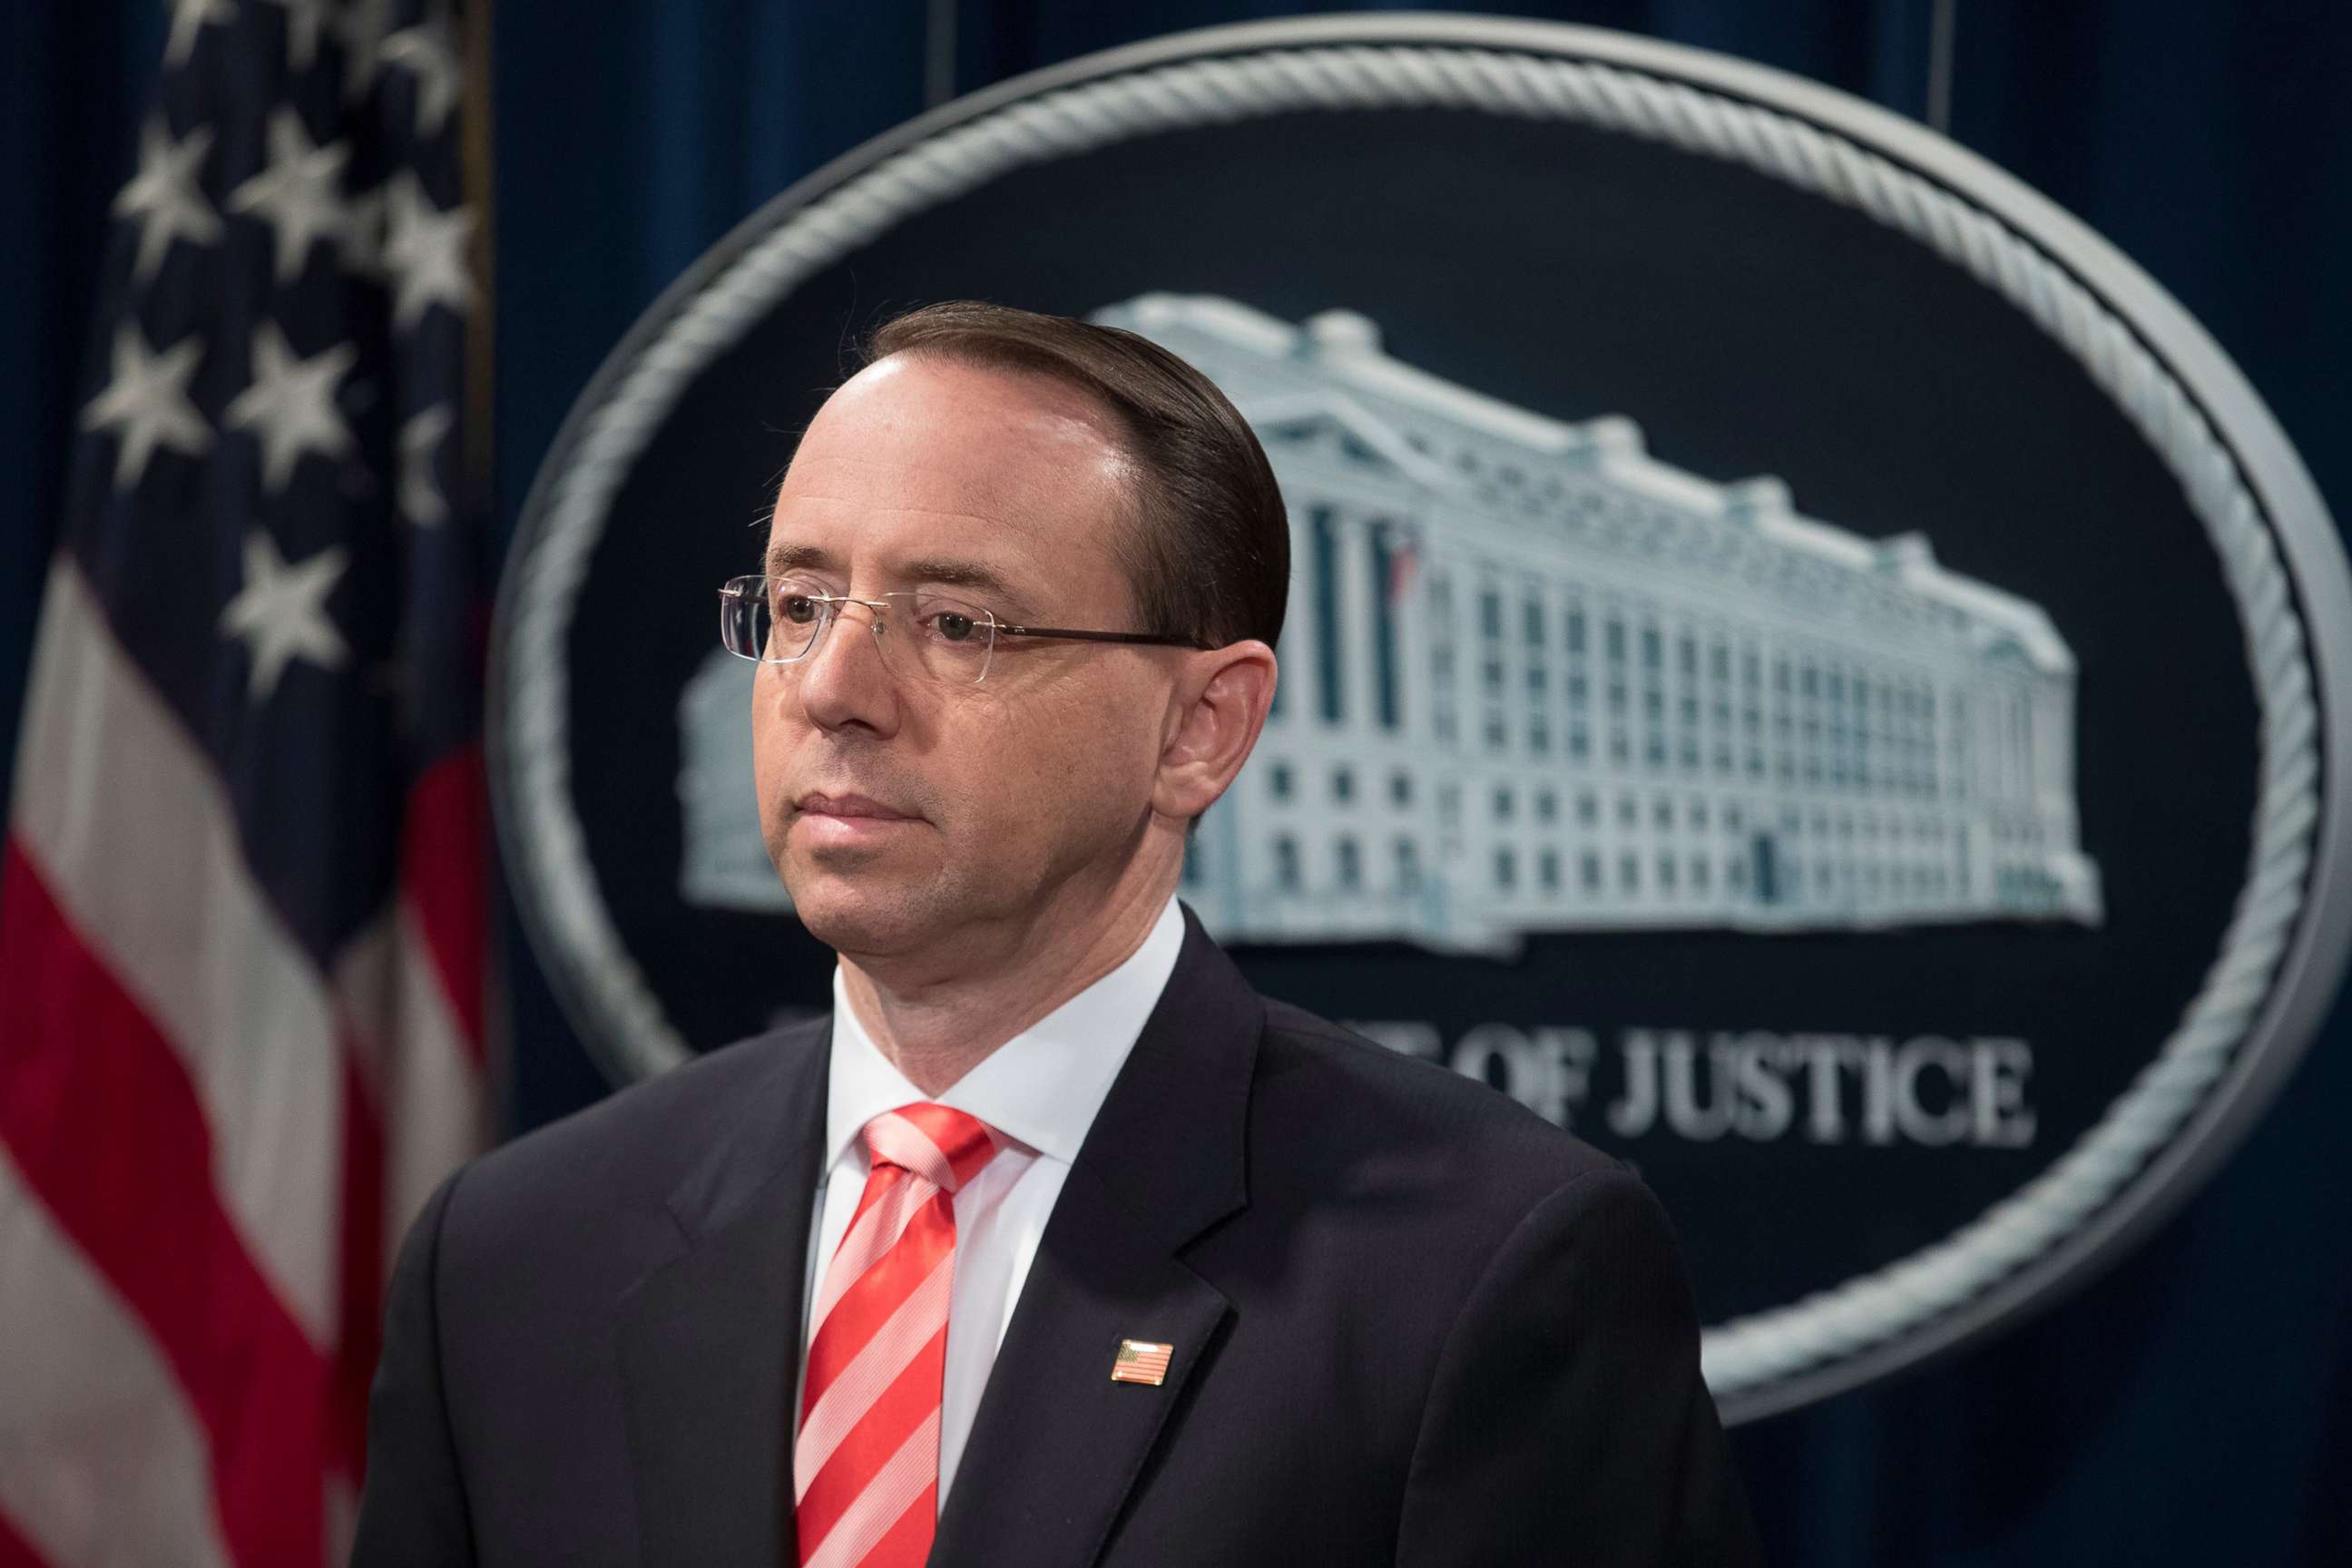 PHOTO: Deputy Attorney General Rod Rosenstein attends a news conference at the Justice Department in Washington, D.C., March 23, 2018.